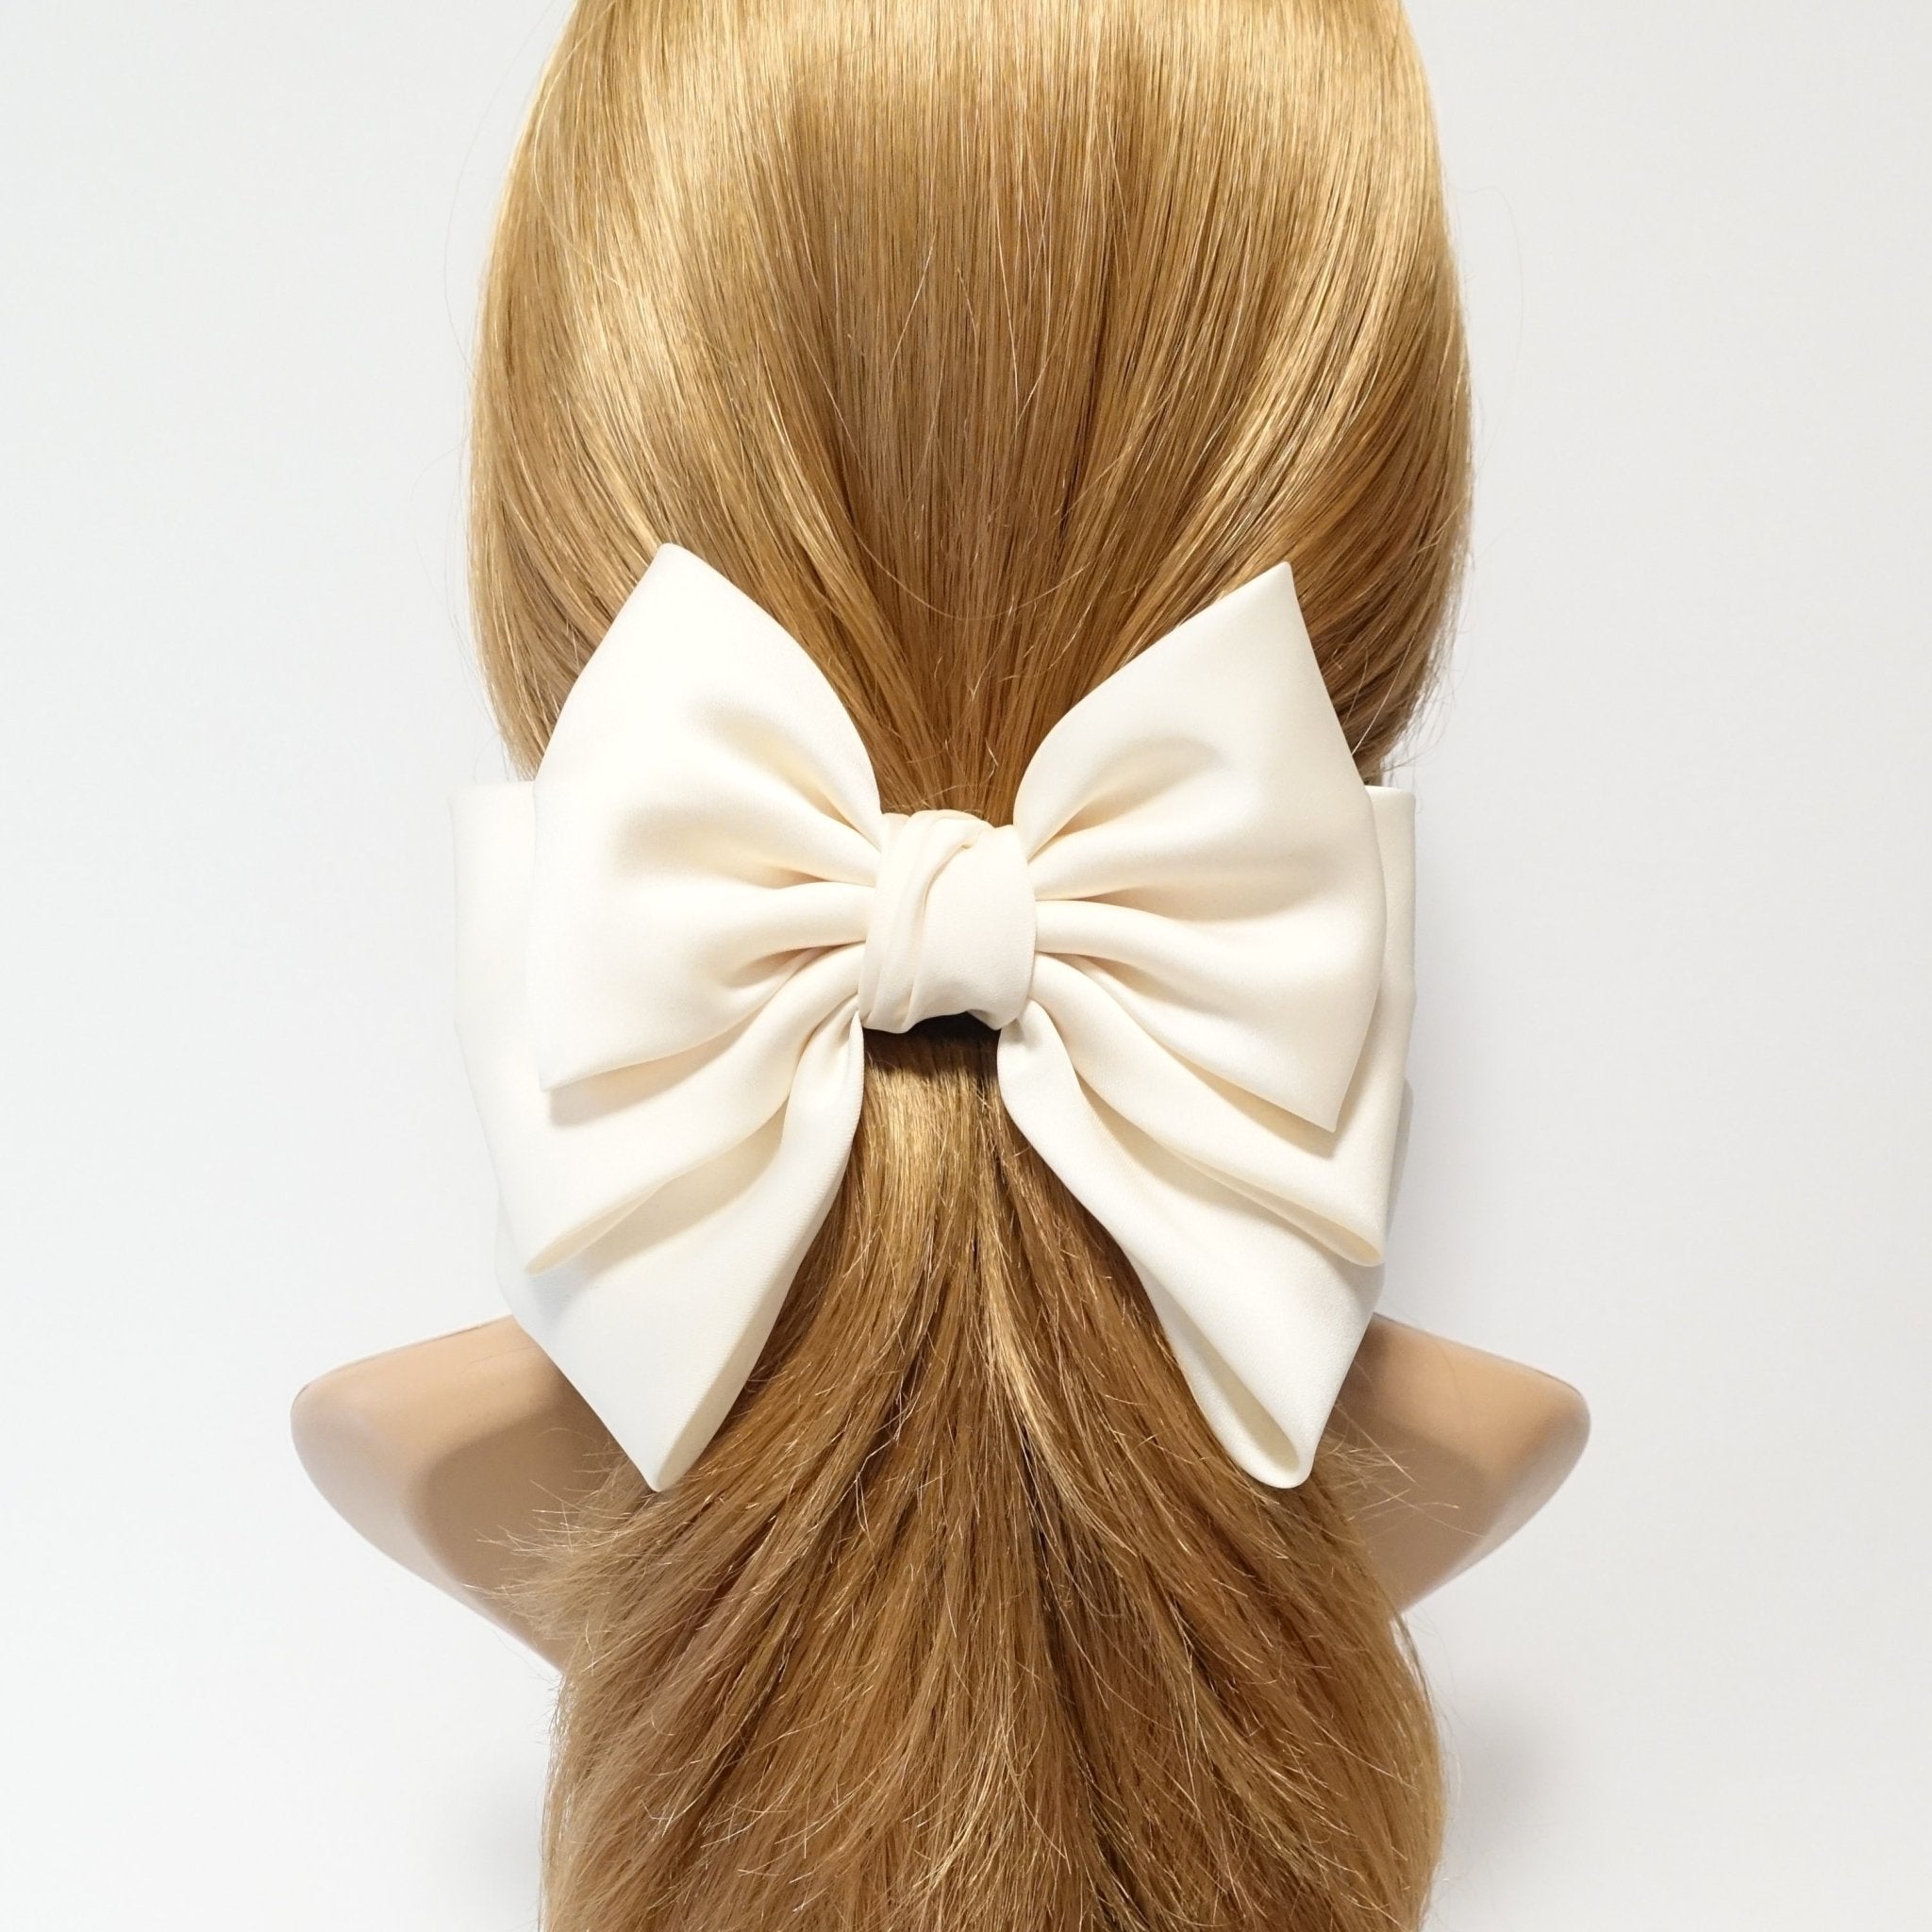 veryshine.com claw/banana/barrette Cream satin layered hair bow french barrette Women solid color stylish hair bow